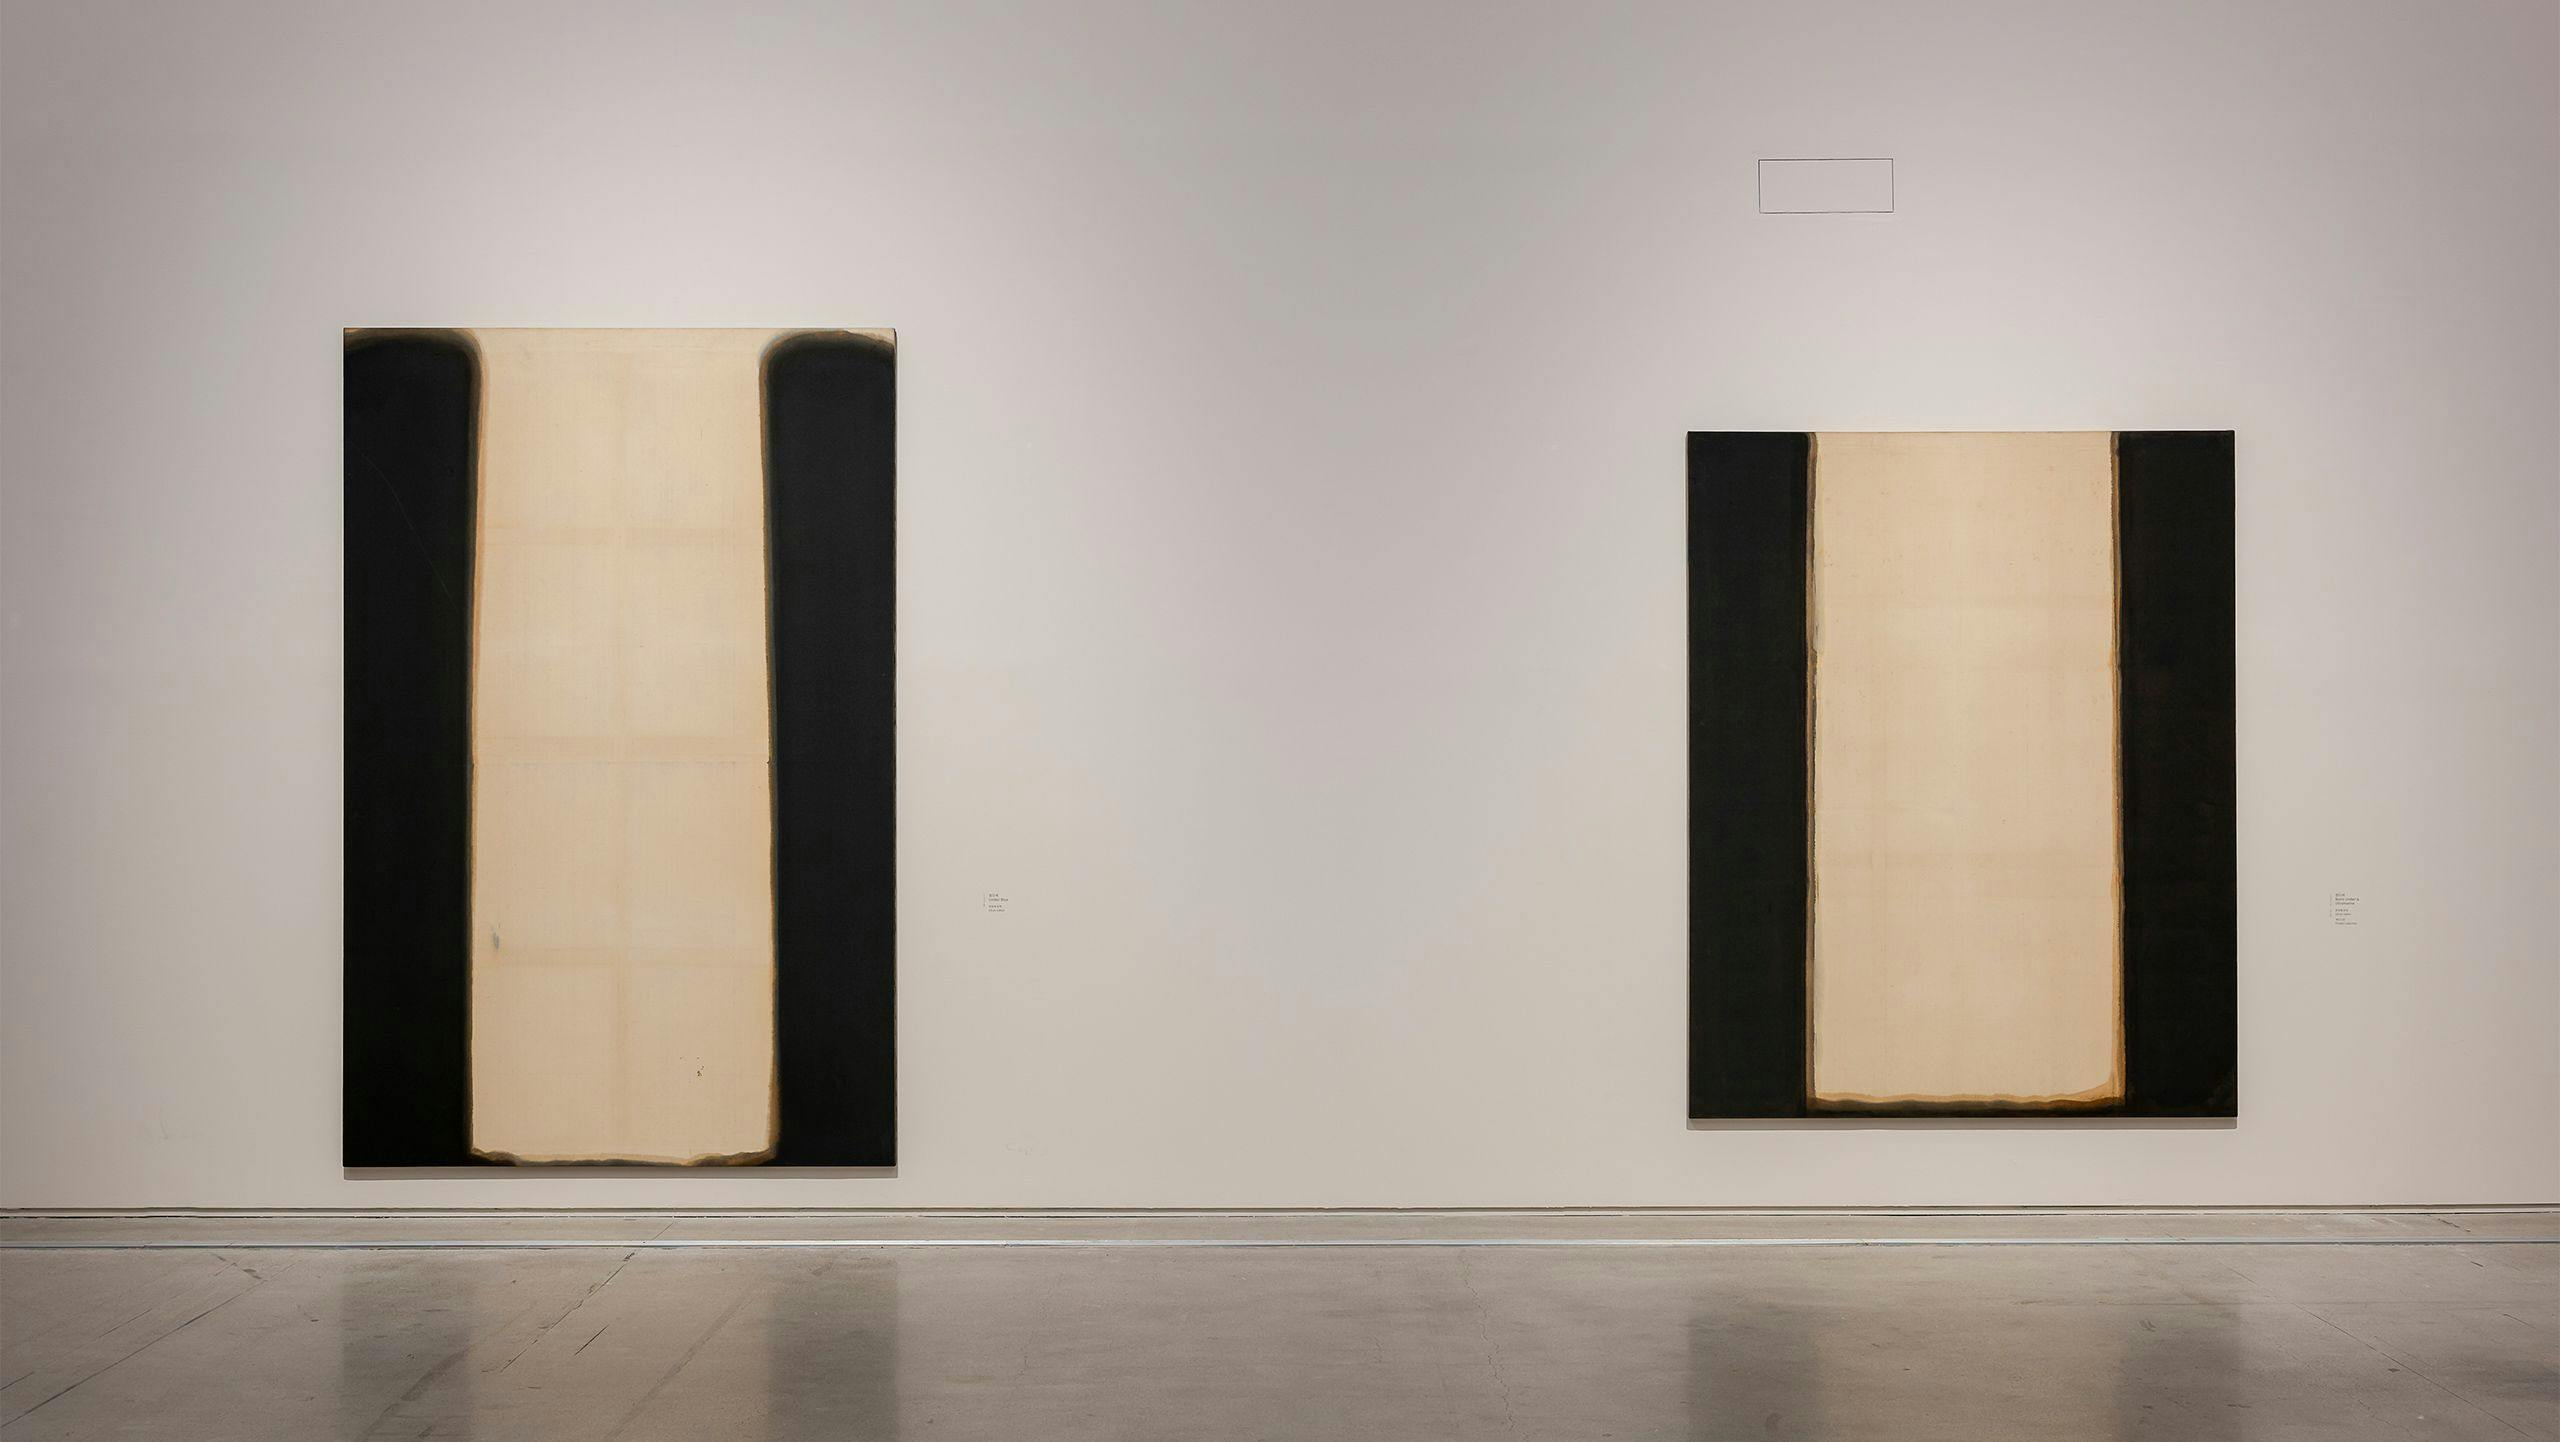 An Installation view of the exhibition, Yun Hyong-keun, at the National Museum of Modern and Contemporary Art in Korea, dated 2018 to 2019.